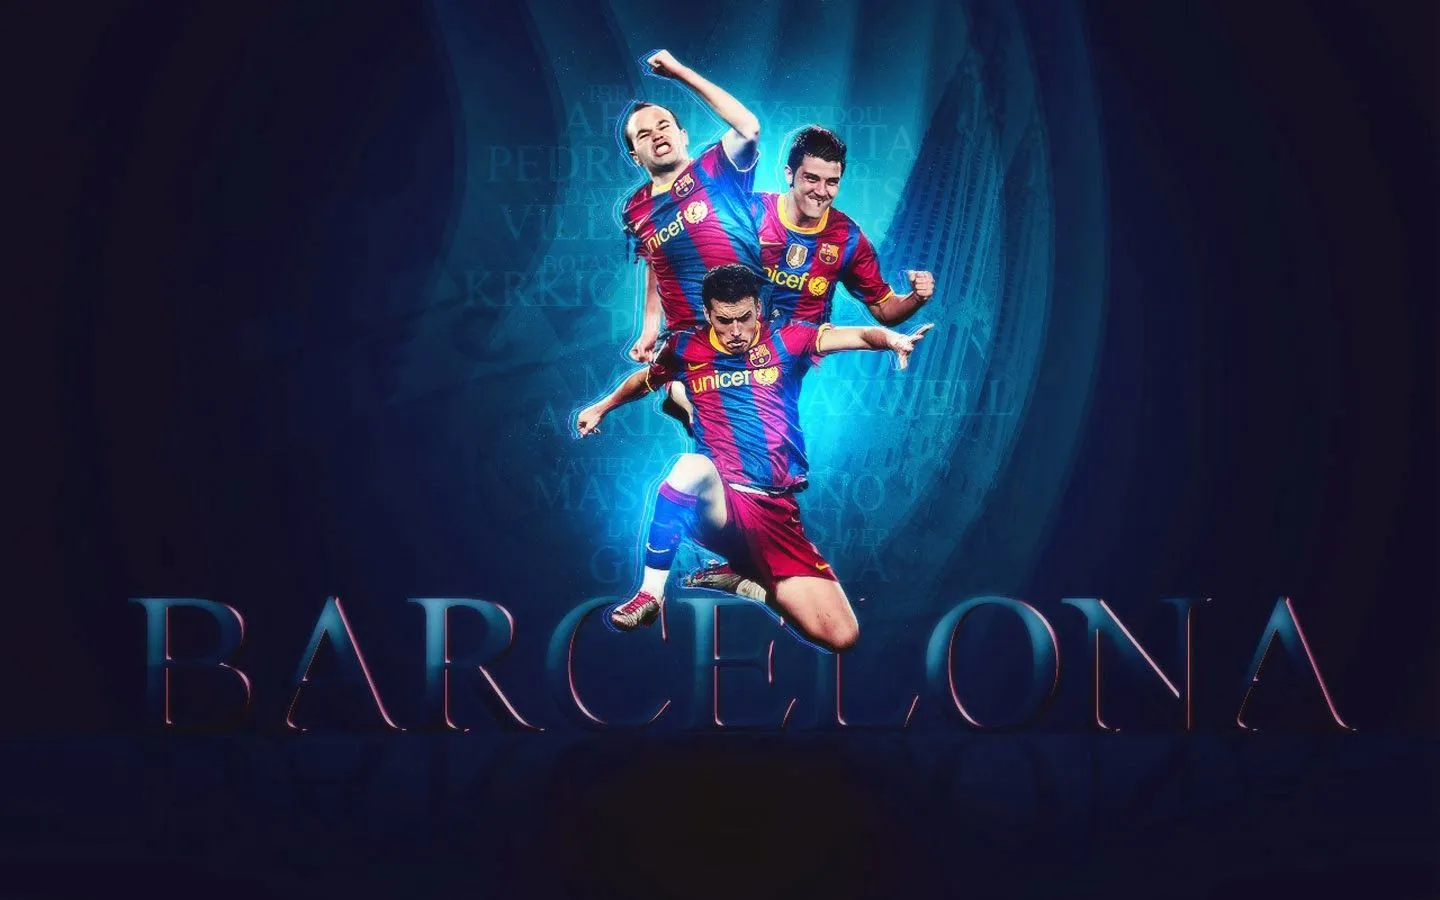 FC Barcelona Players New HD Wallpapers 2013-14 | All Football ...